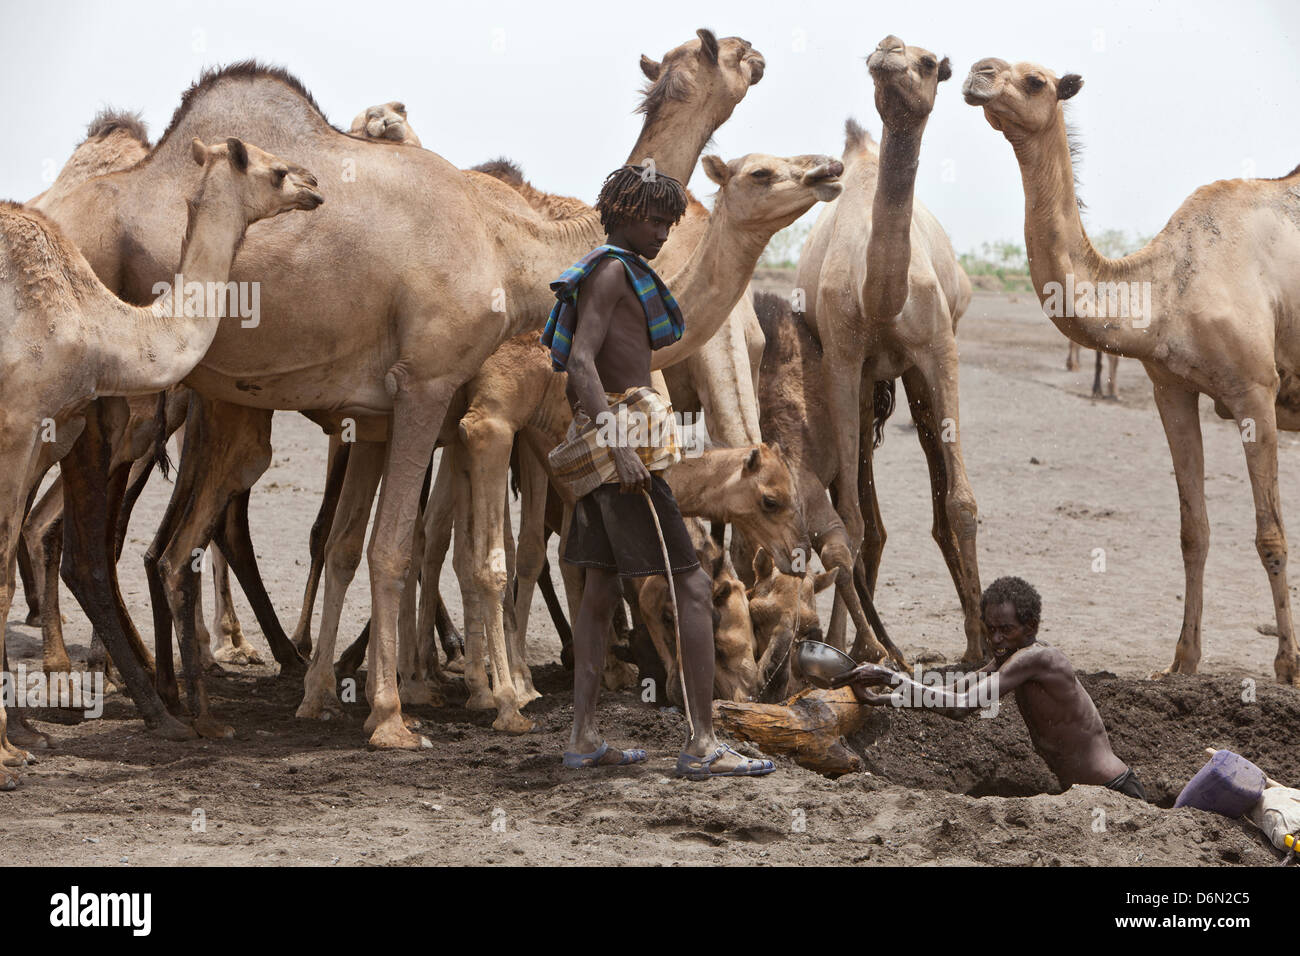 Awash, Ethiopia, nomads dig in a dry river bed with his hand on the water Stock Photo